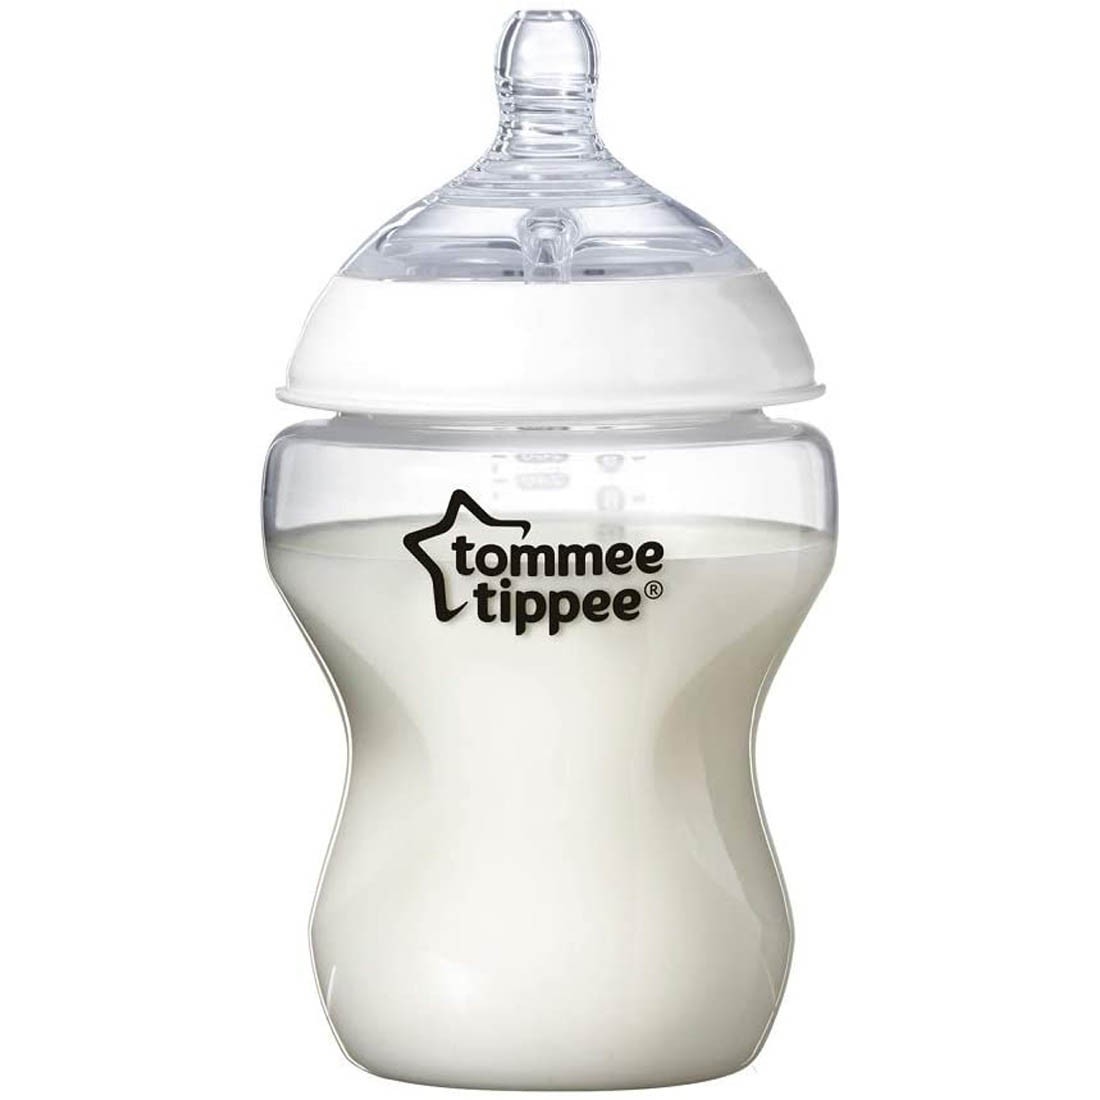 Tommee Tippee Bottle Closer to Naturet thick formula 340 ml